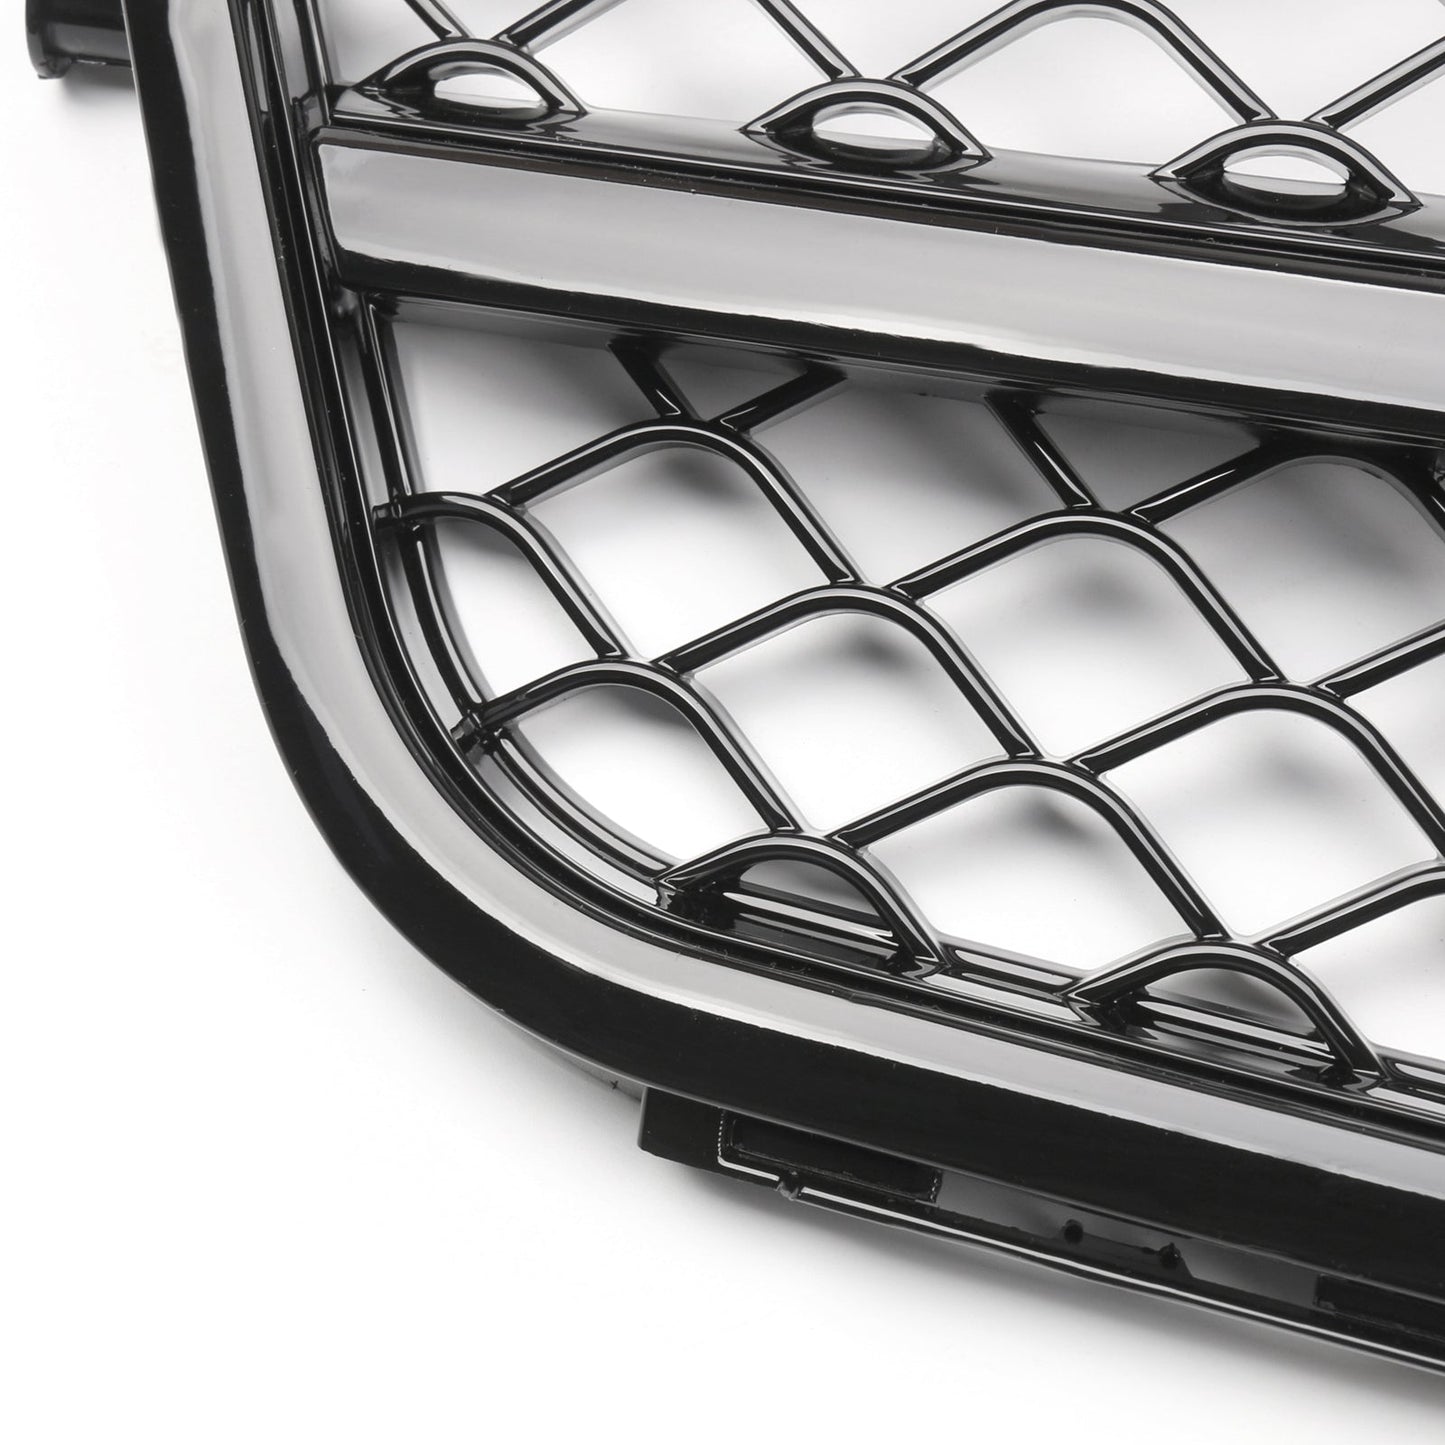 W204 C-Class 2008-2014 Benz C300 C350 Front Grill Gloss Black Car Grille C63 Style